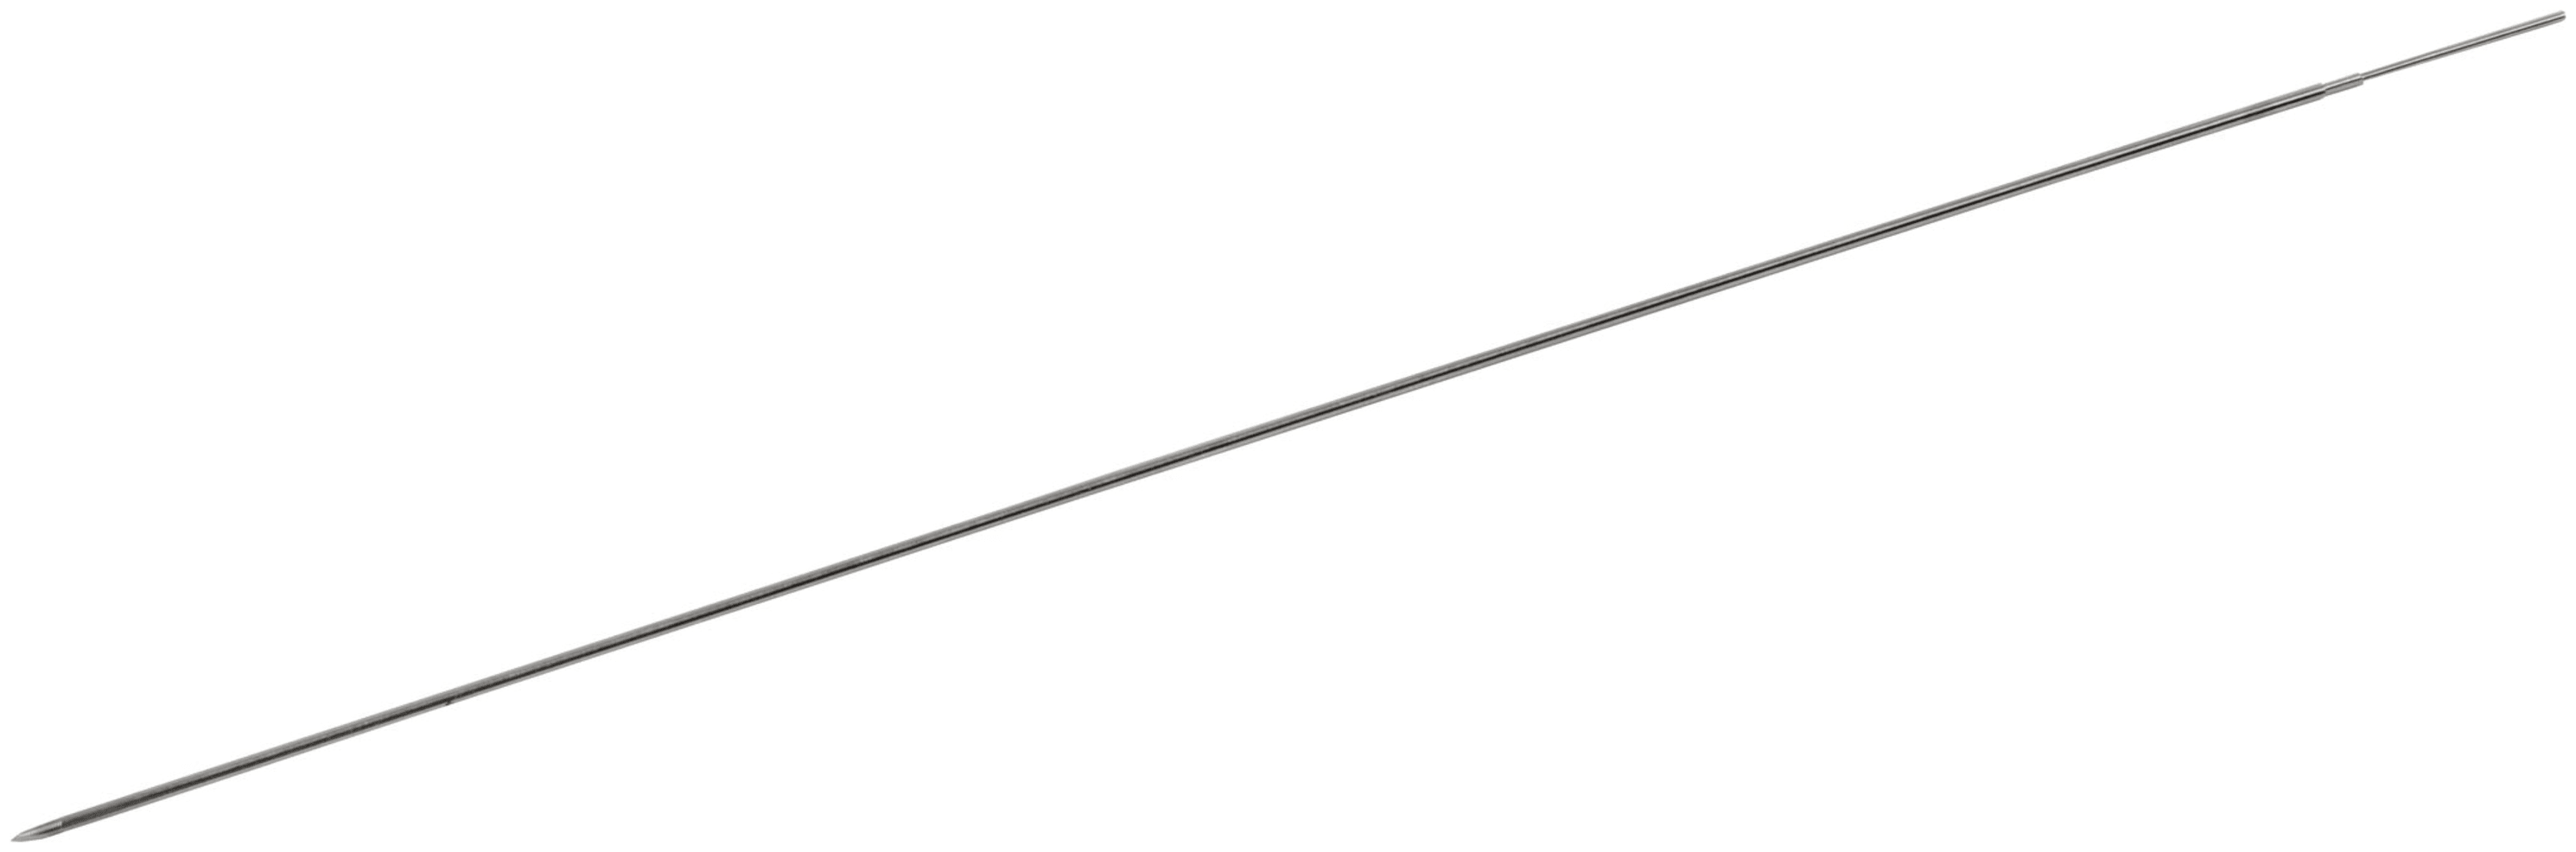 Percutaneous Pinning, Guidewire, Disposable, 1.6 mm